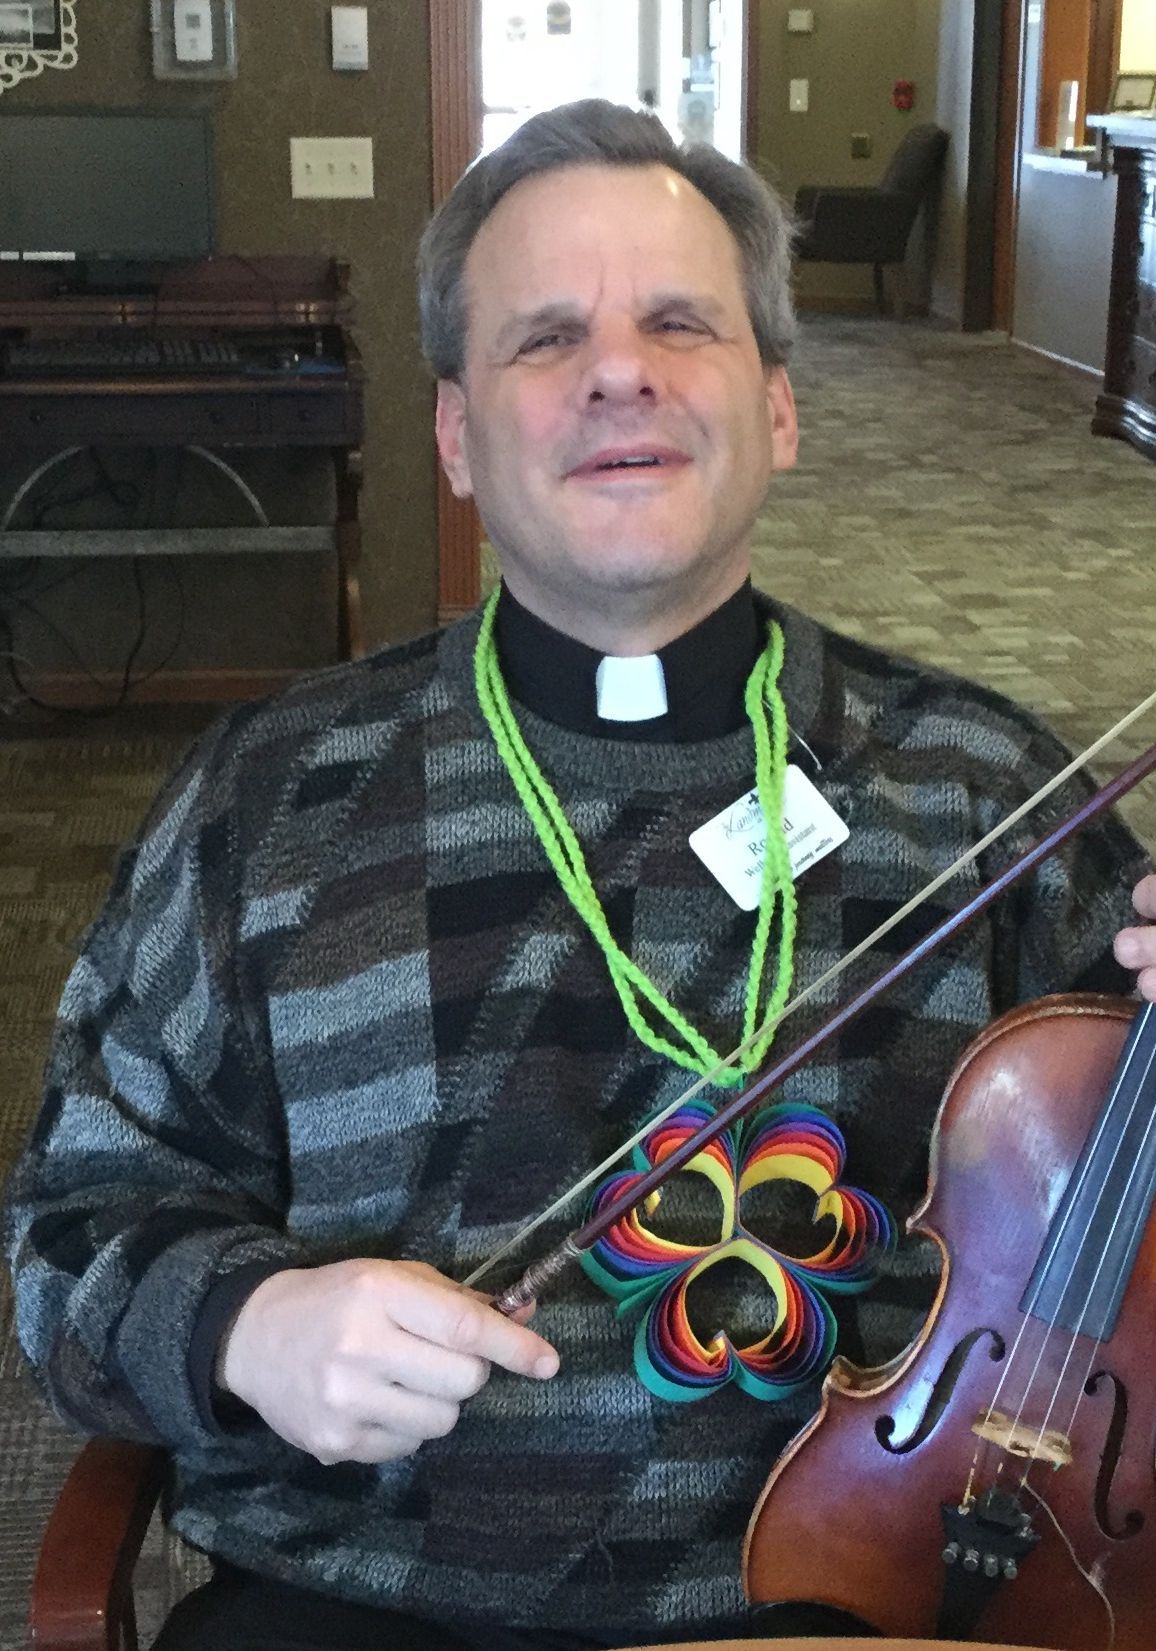 Father Ron pictured with a violin